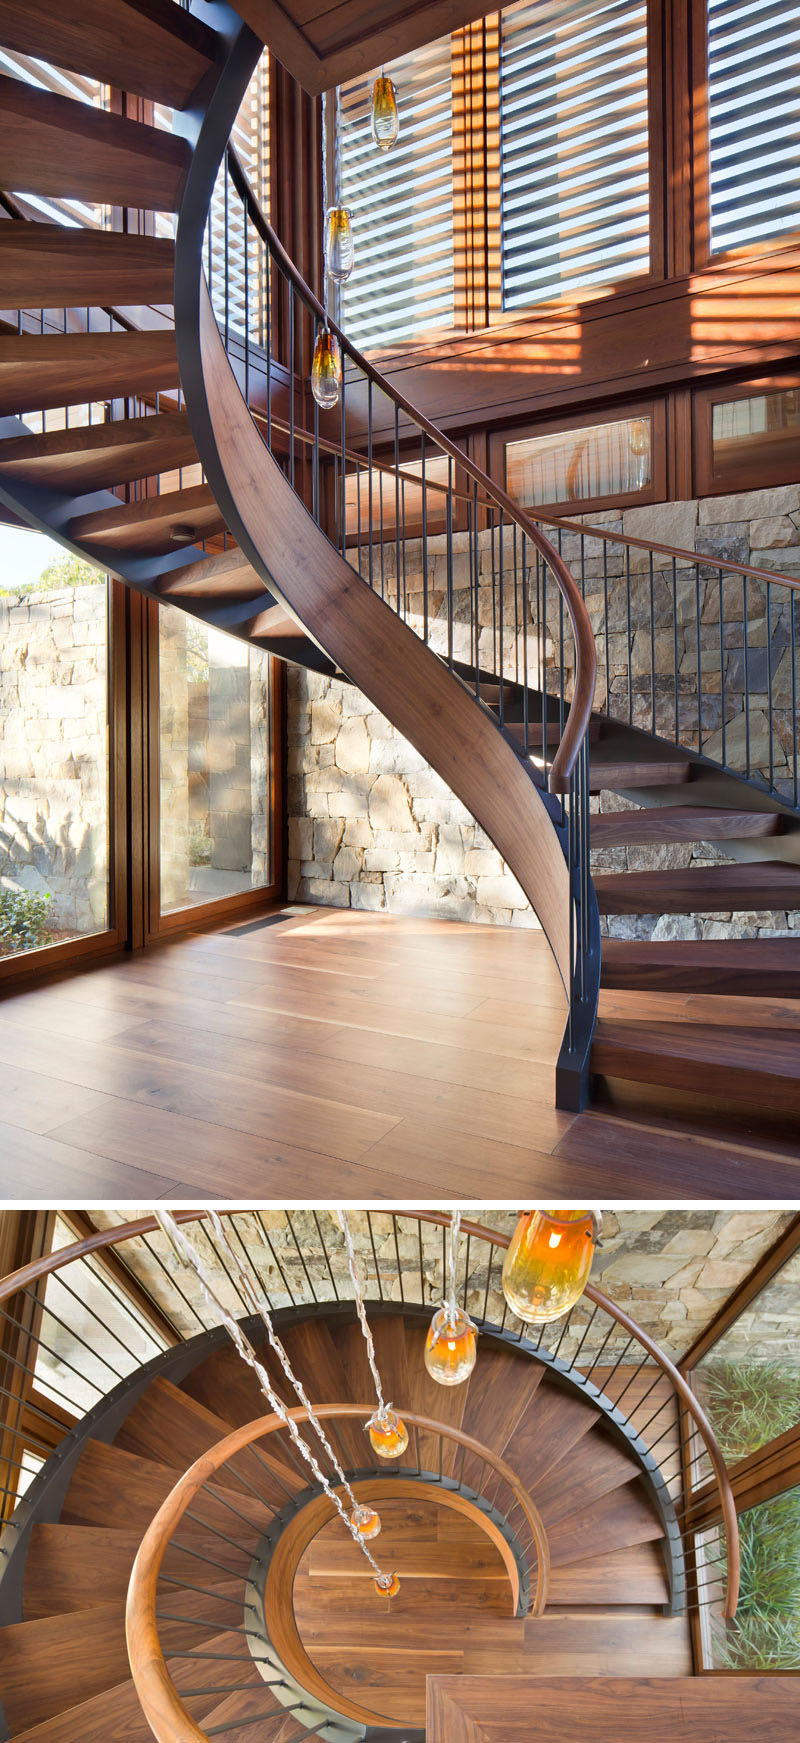 This modern house has a wood and metal spiral staircase that connects the various floors of the home. #SpiralStaircase #StairDesign